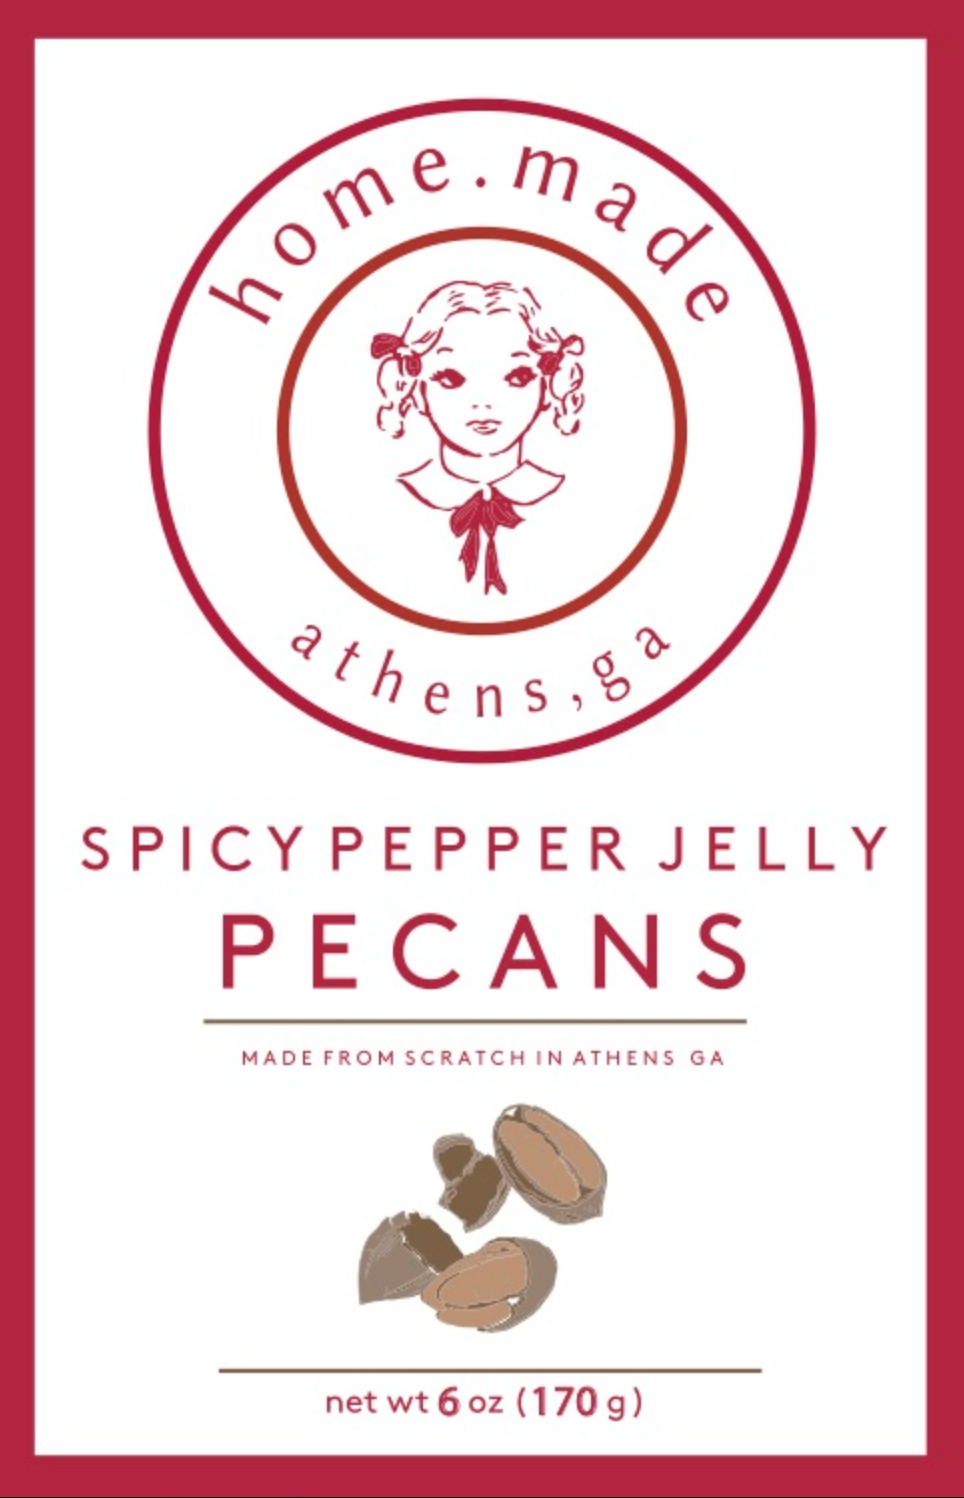 home.made Spicy Pepper Jelly Pecans